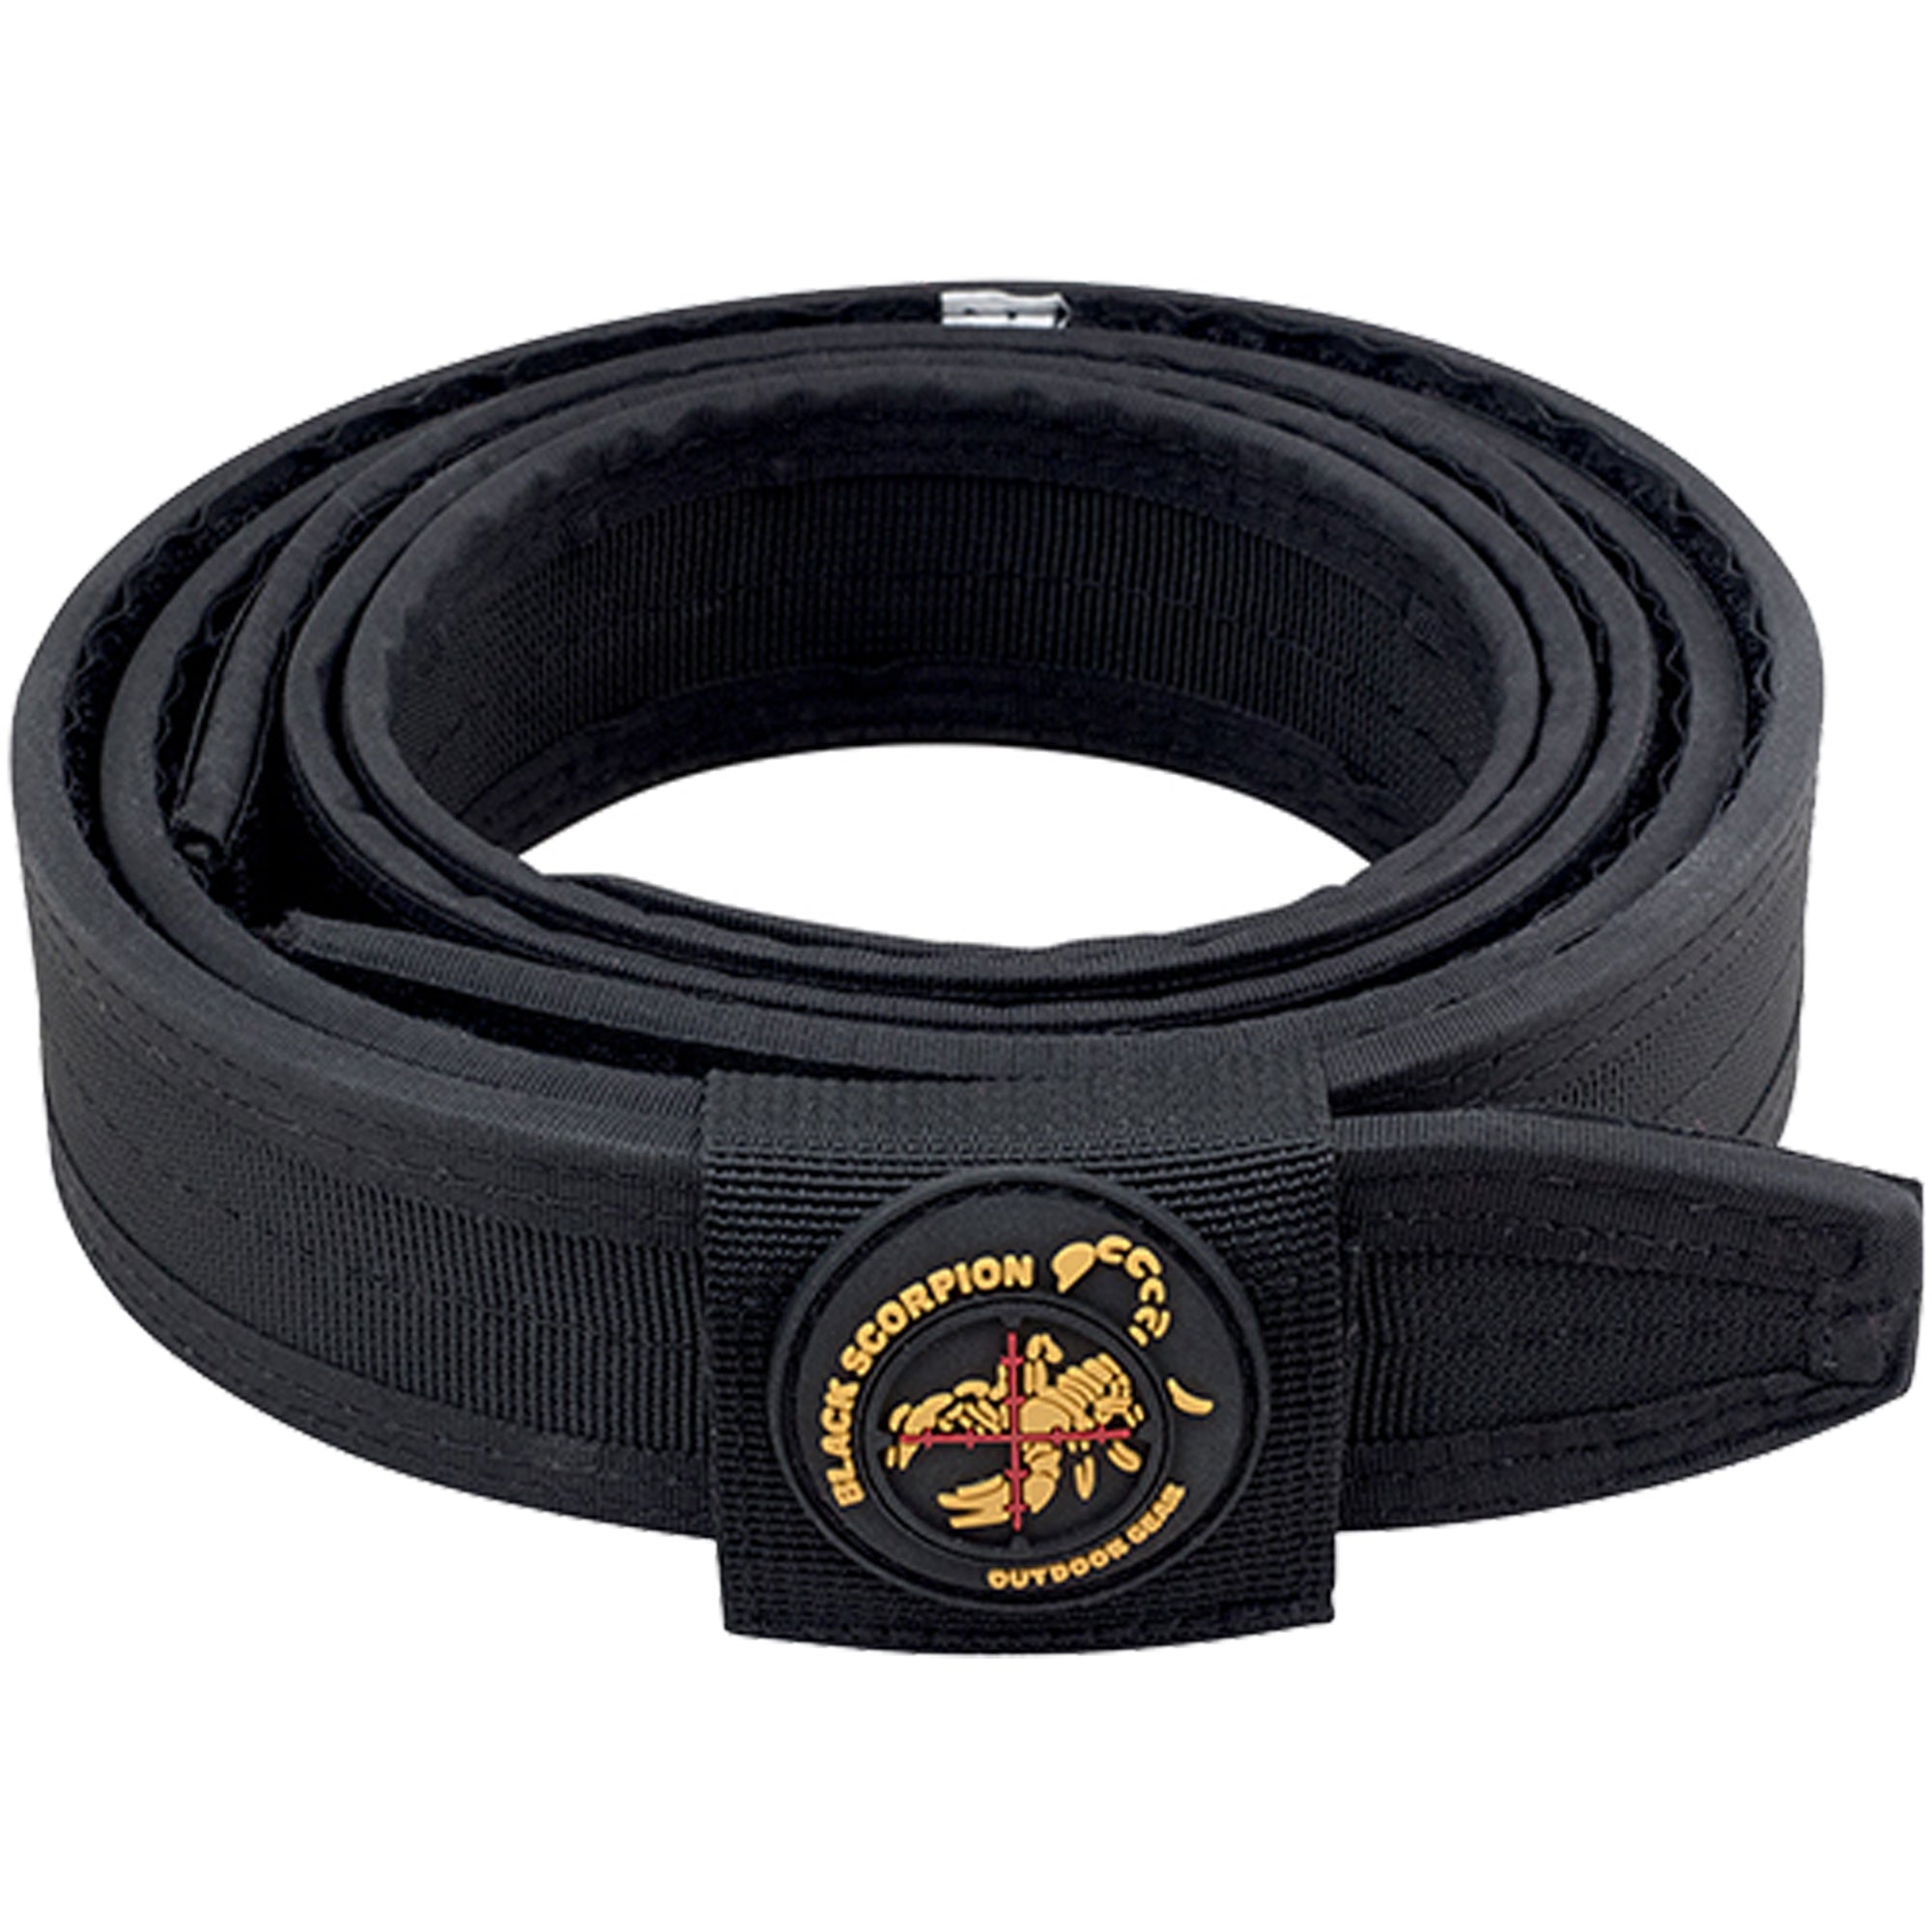 Competition Rig - 1 Heavy Duty Belt w/ 4 Ambidextrous Single/Double Stack Magazine Pouches